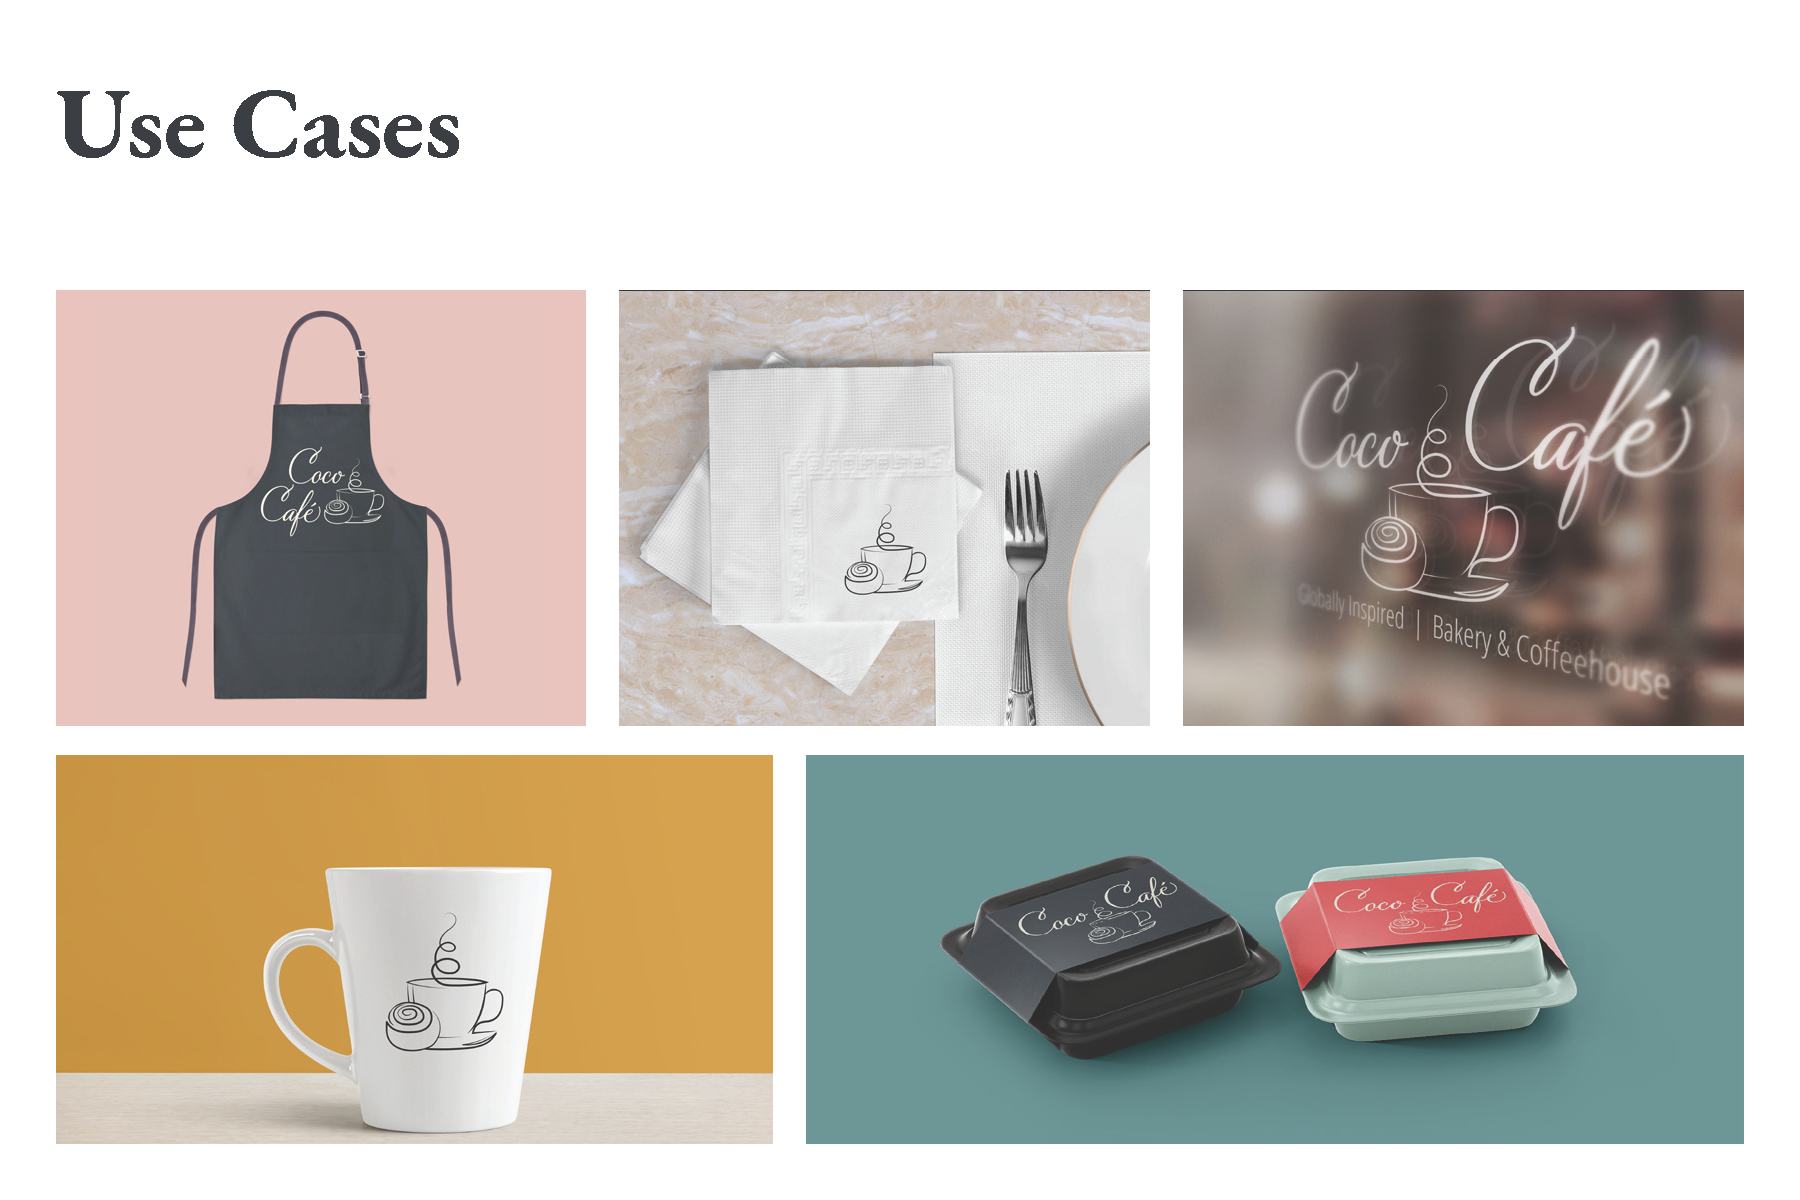 Images of mockups with the Coco Cafe logo on products and other items.